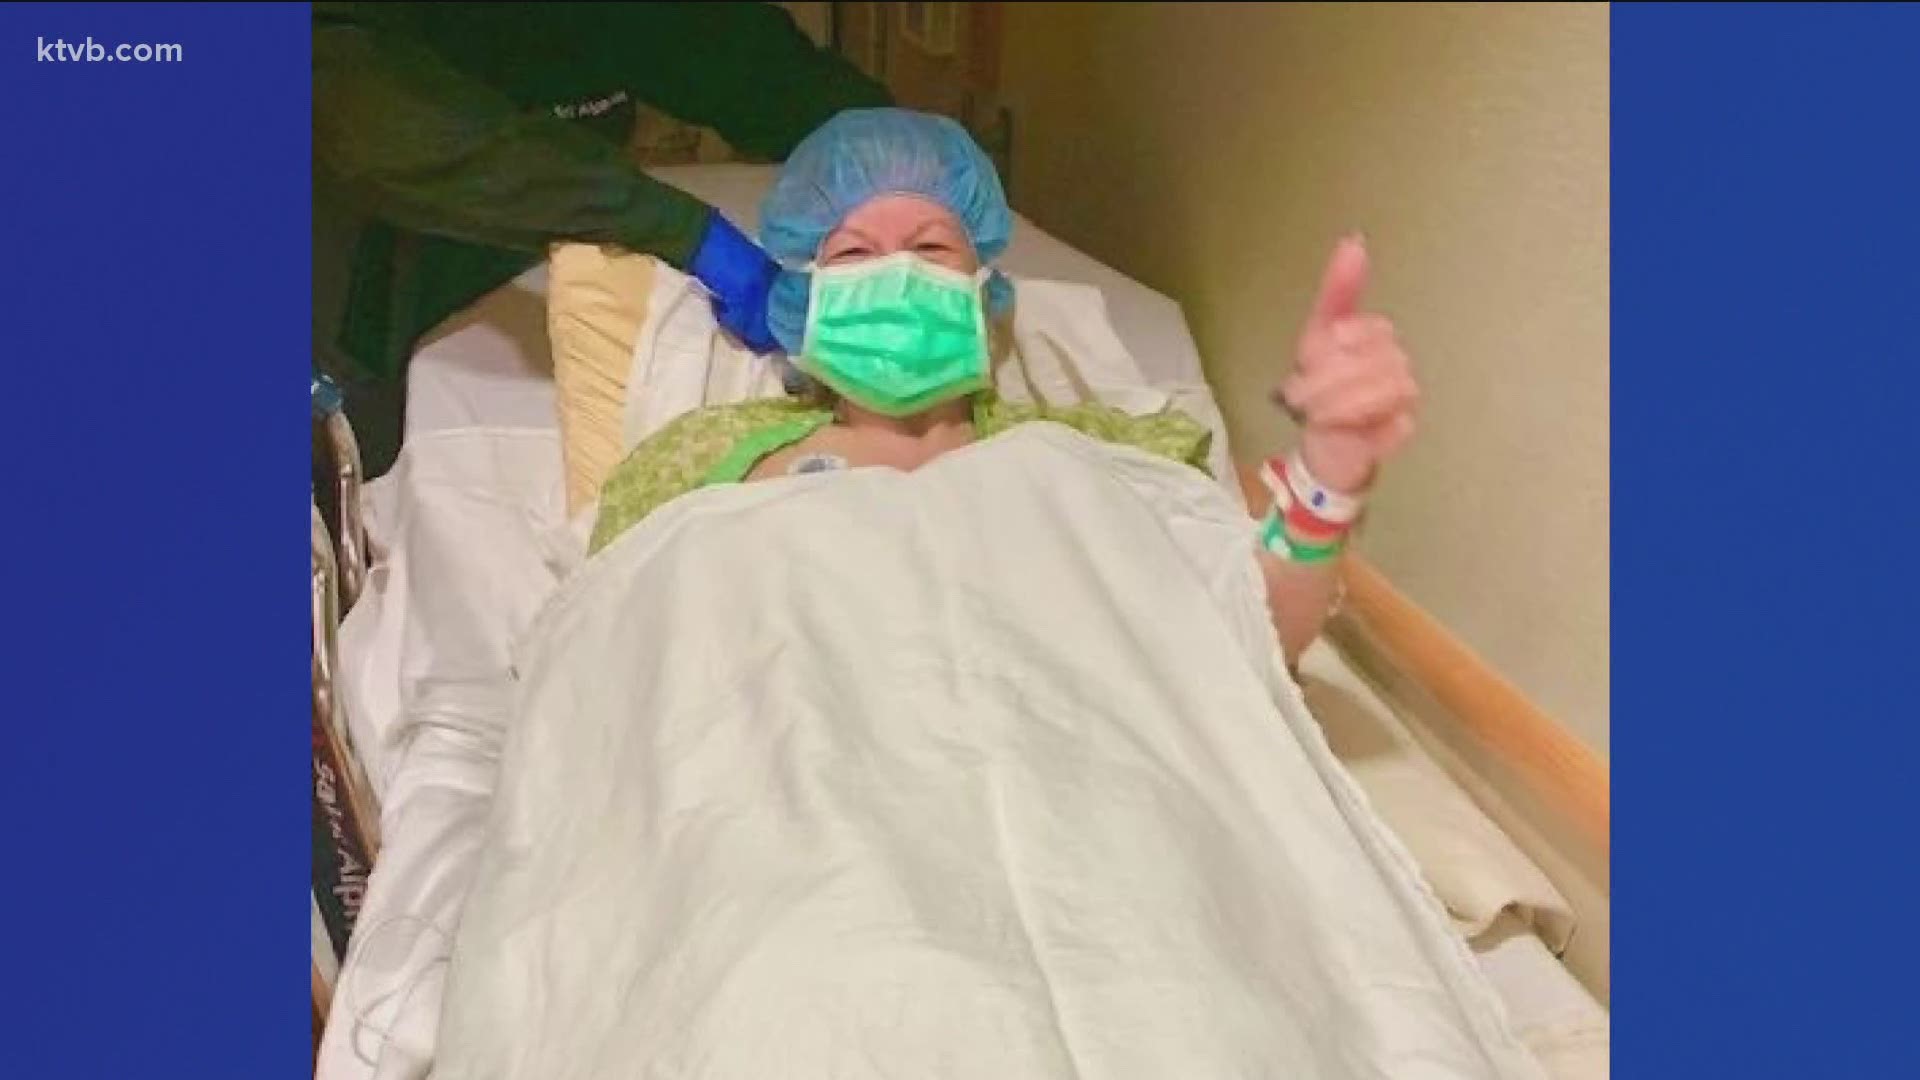 Wife and mom Stephanie Kjerstad was diagnosed with Stage 3 cancer in 2020. After going through aggressive treatment, she wanted to give back to other patients.